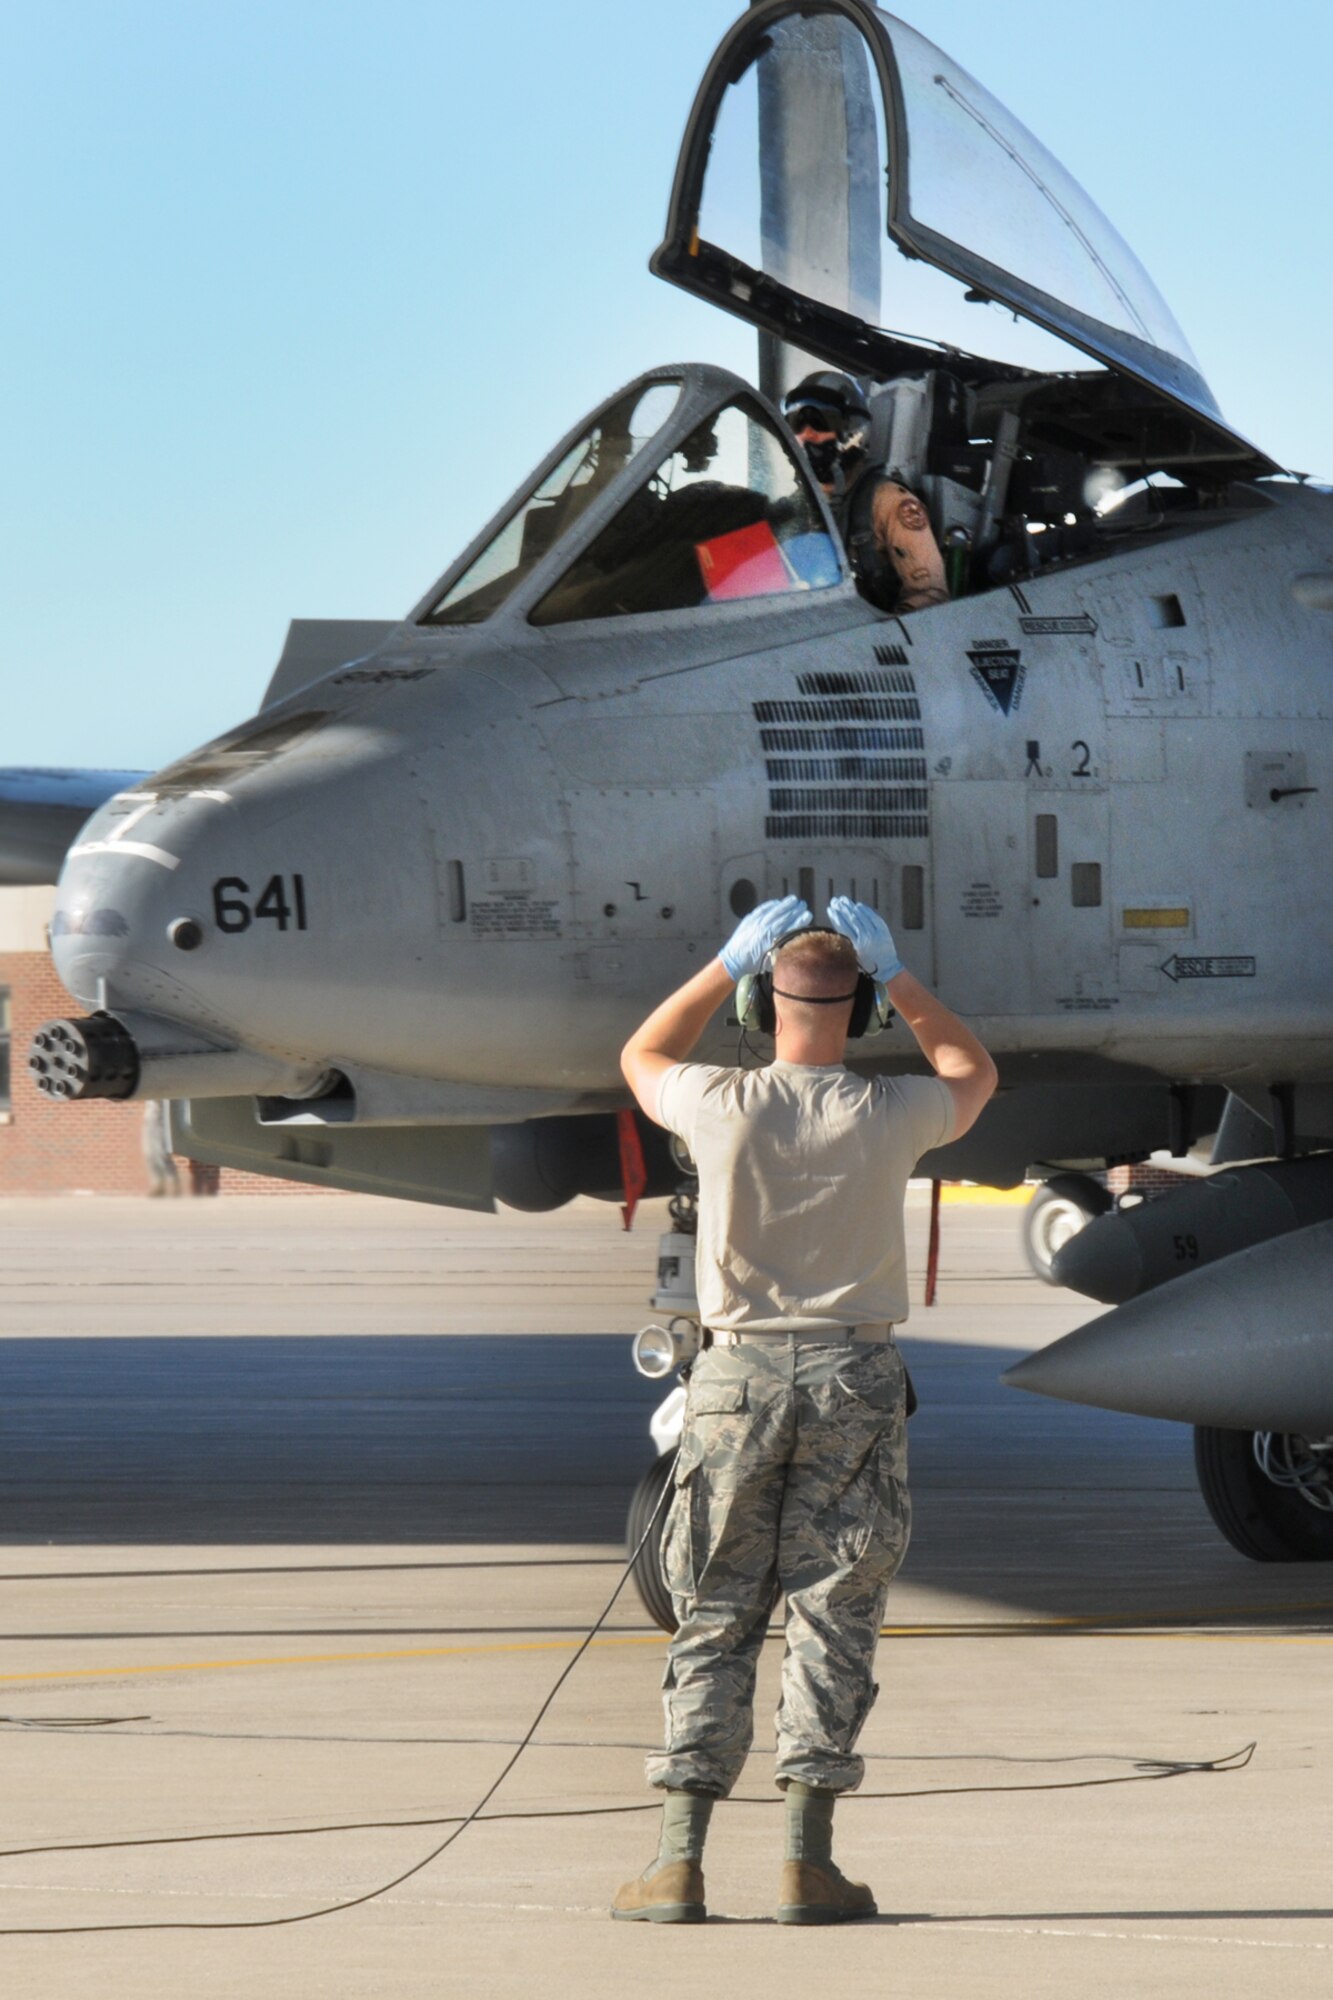 151022-Z-YW189-002 - -A crew chief with the 127th Aircraft Maintenance Squadron marshals an A-10 Thunderbolt II at Selfridge Air National Guard Base, Mich., after a six month deployment on October 22, 2015. The A-10 returned from a six month deployment from southwest Asia in support of U.S. Central Command’s Operations Inherent Resolve. (U.S. Air National Guard photo by Staff Sgt. Samara Taylor/Released) 